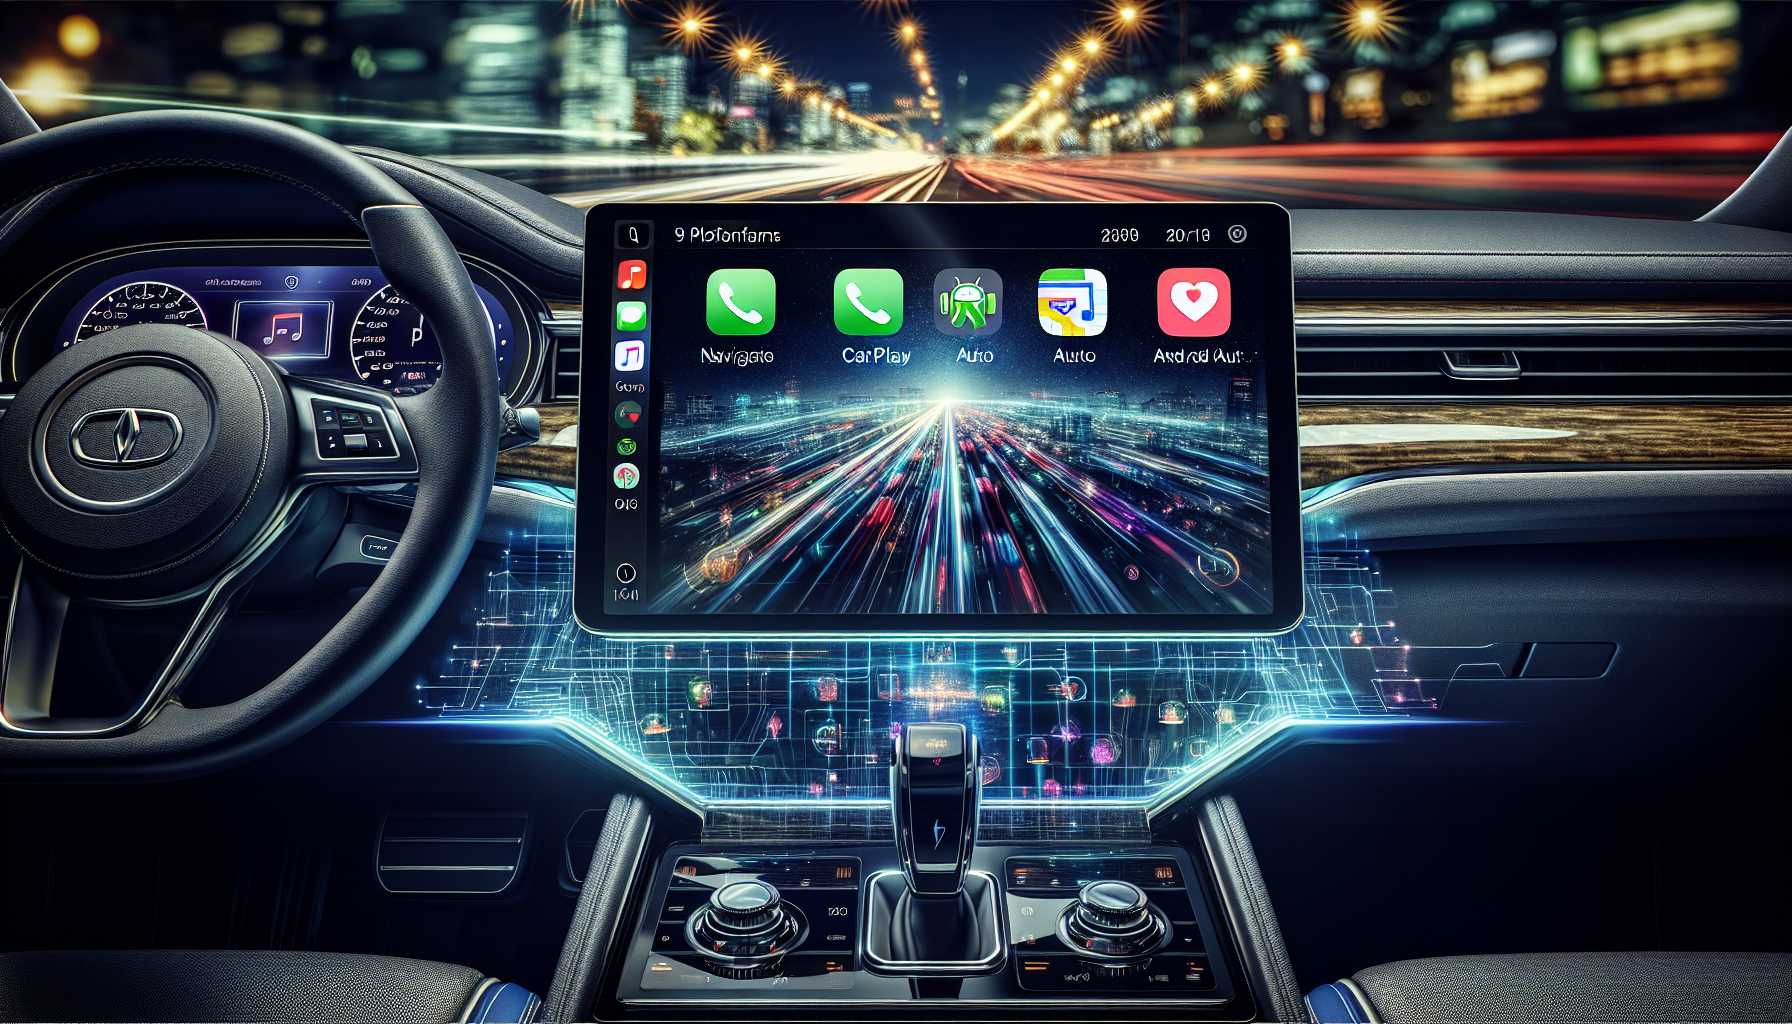 9-inch Wireless Car Display with Apple CarPlay and Android Auto on the screen